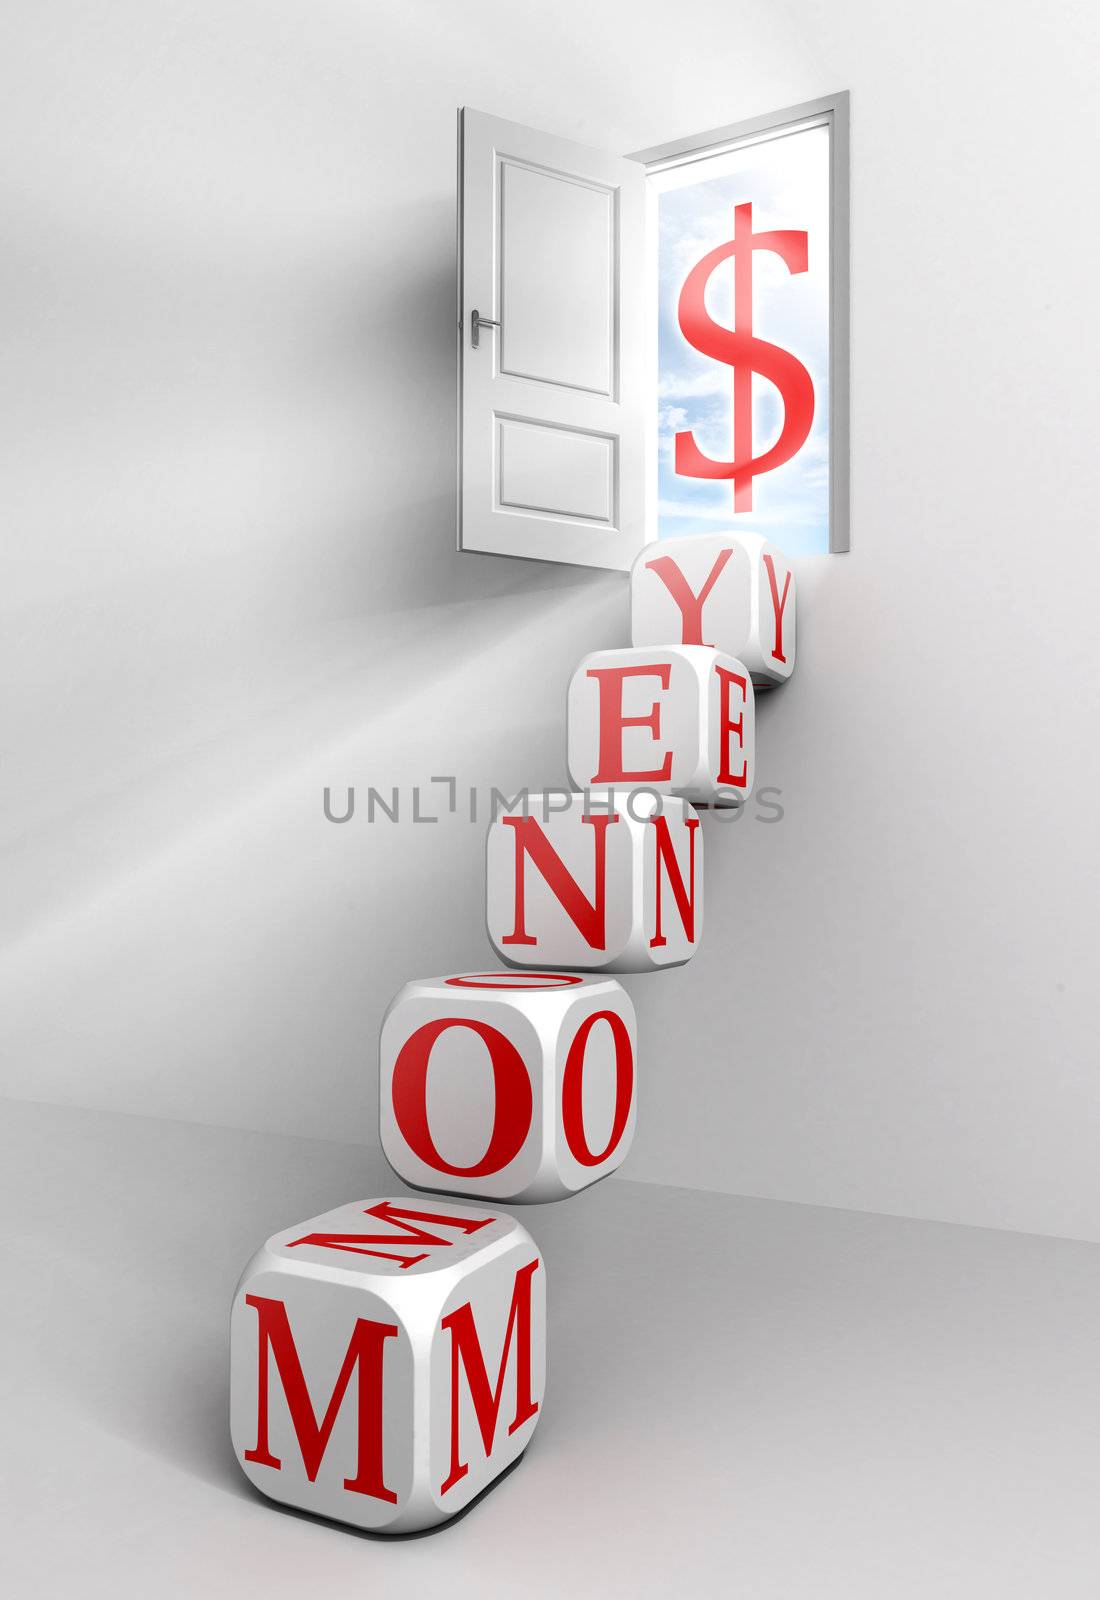 money conceptual door with sky and box red word  ladder in white room with dollar symbol metaphor 